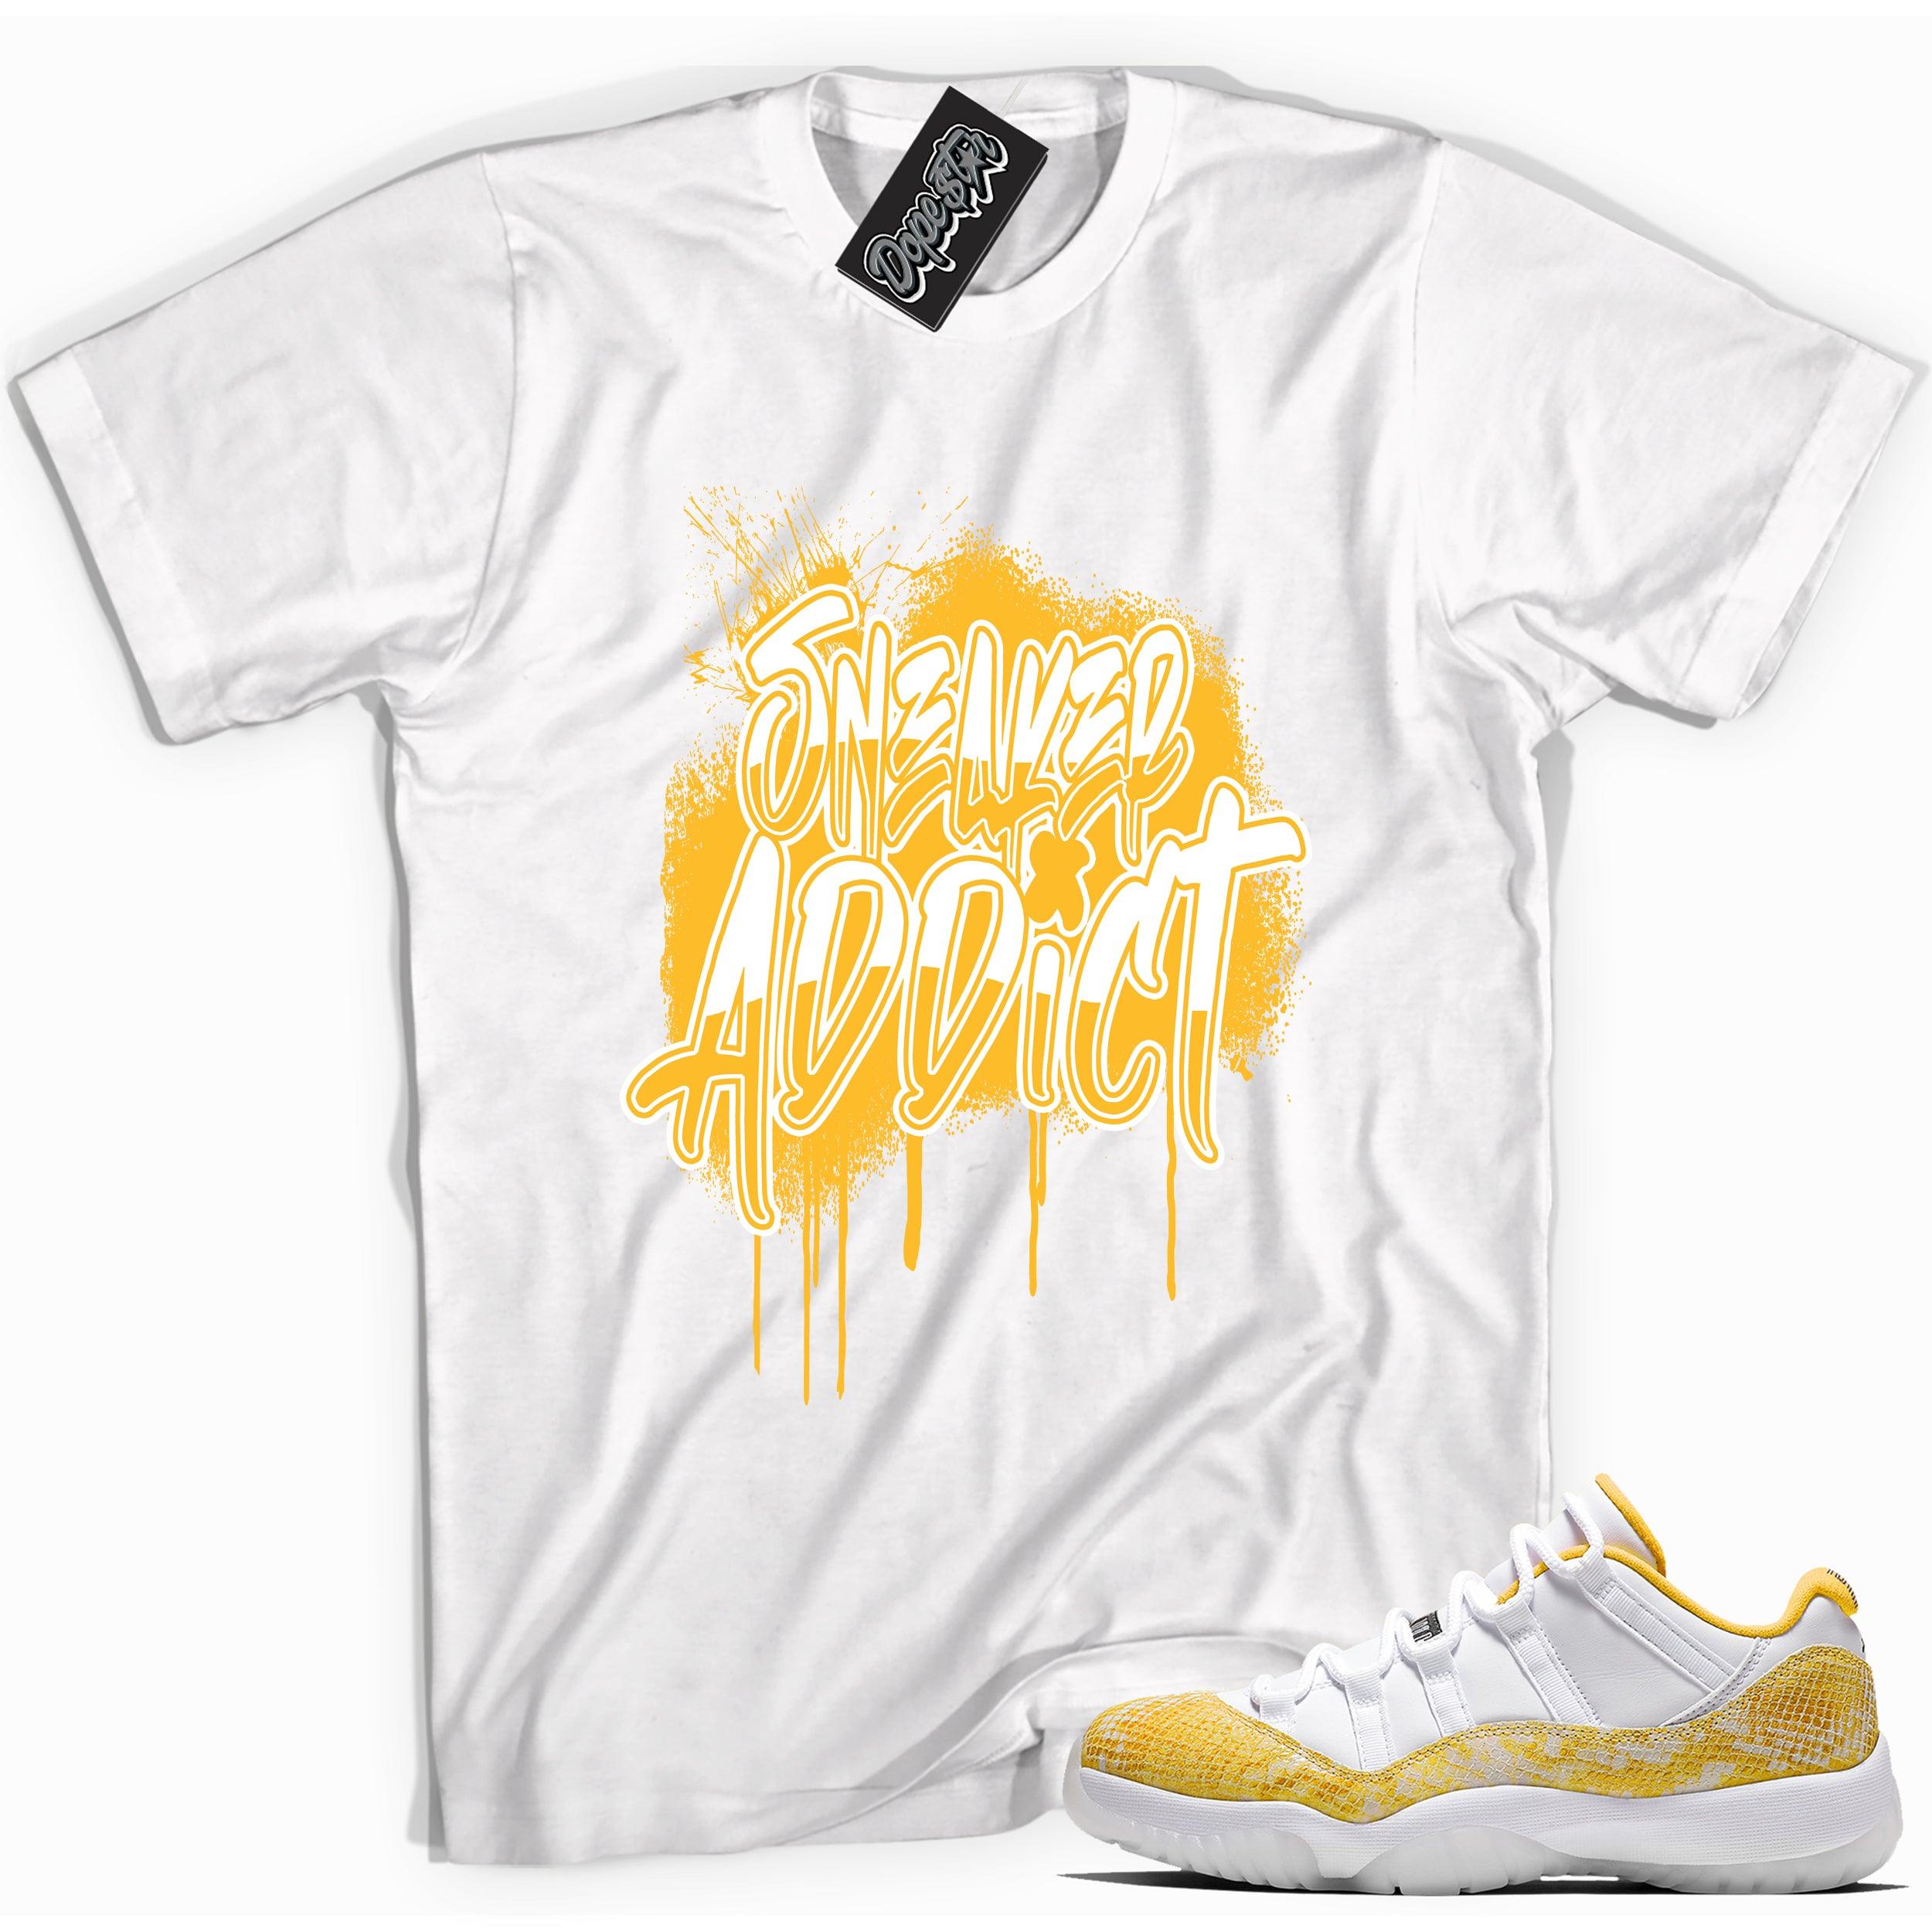 Cool white graphic tee with 'sneaker addict' print, that perfectly matches Air Jordan 11 Retro Low Yellow Snakeskin sneakers